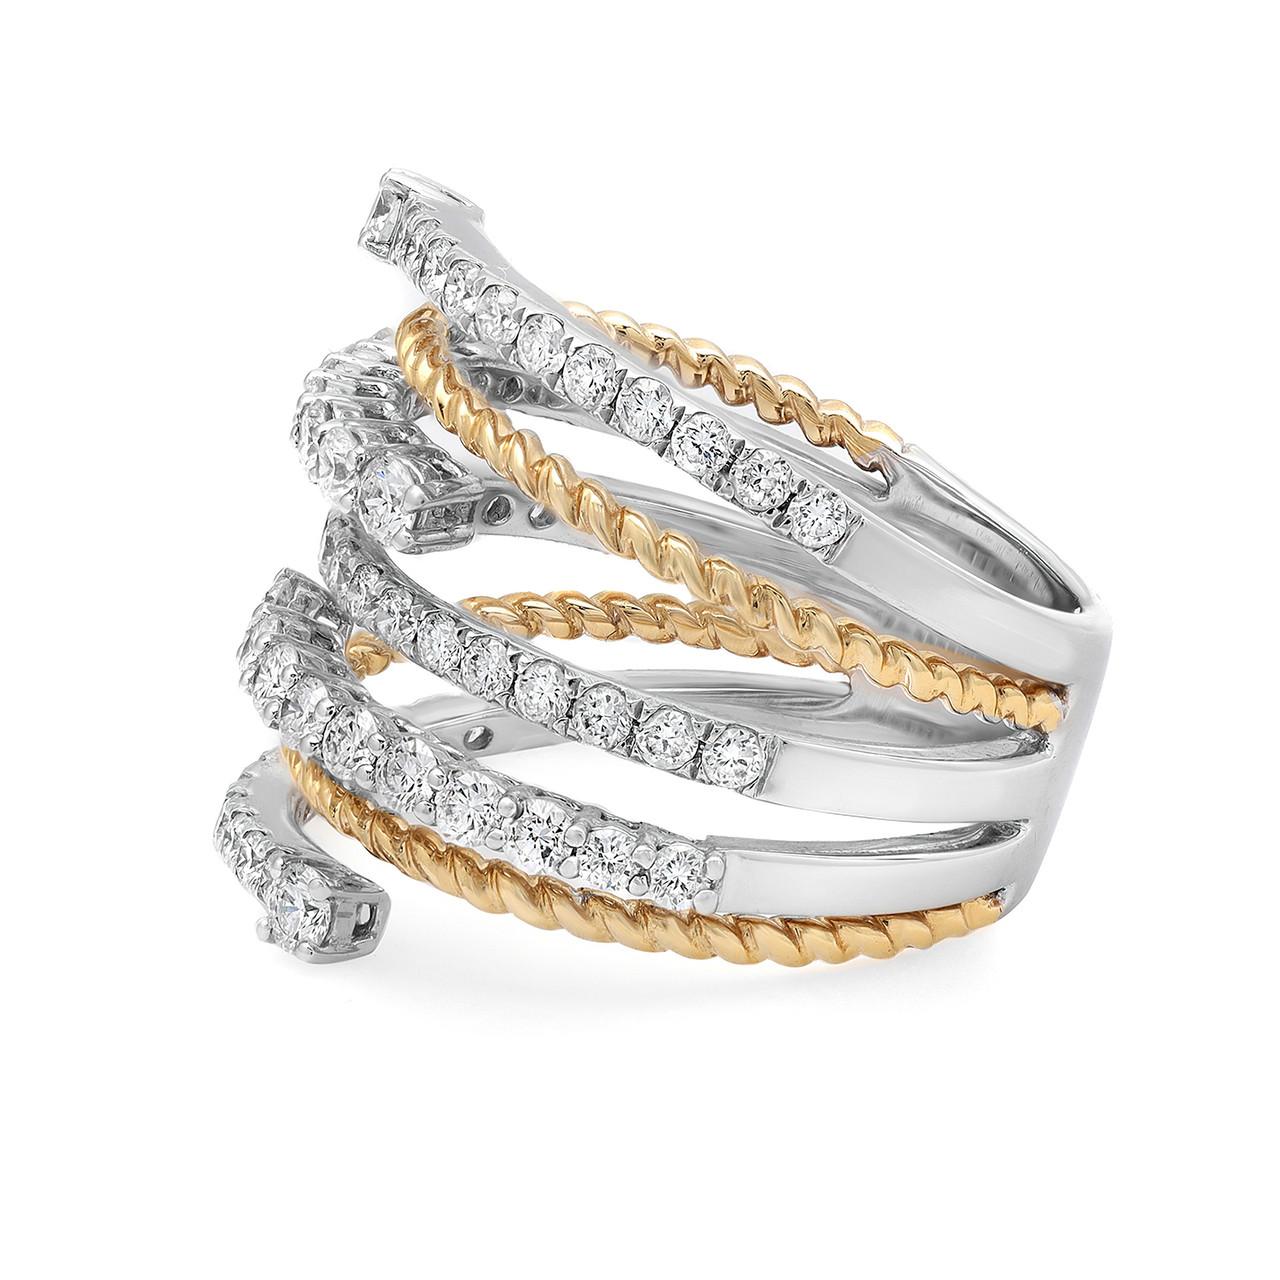 Make a bold and fabulous statement with our stunning 1.19 Carat Round Cut Diamond Cocktail Ring in 18K gold. This ring is designed to impress, featuring multiple rows of diamonds in a wide openwork design. It's crafted with precision in